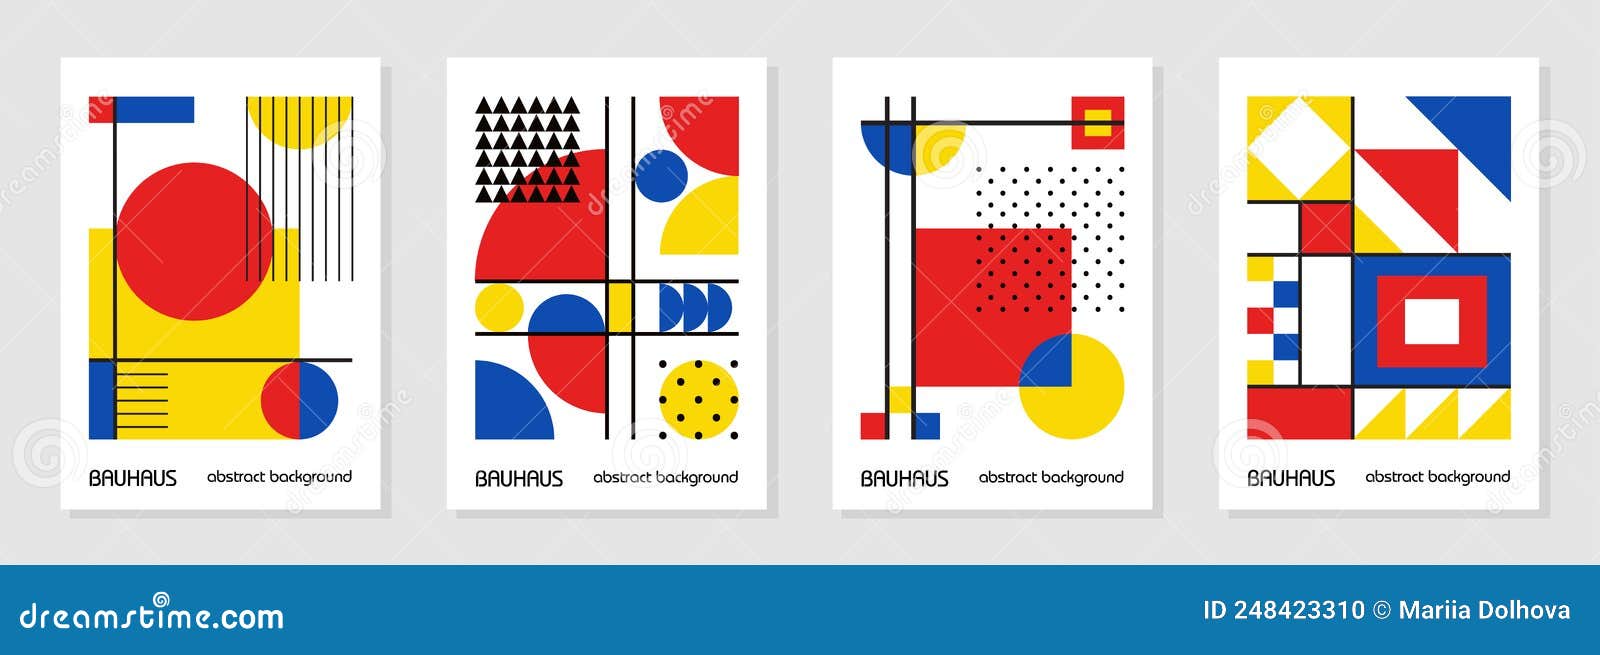 set of 4 minimal vintage 20s geometric  posters, wall art, template, layout with primitive s s. bauhaus retro